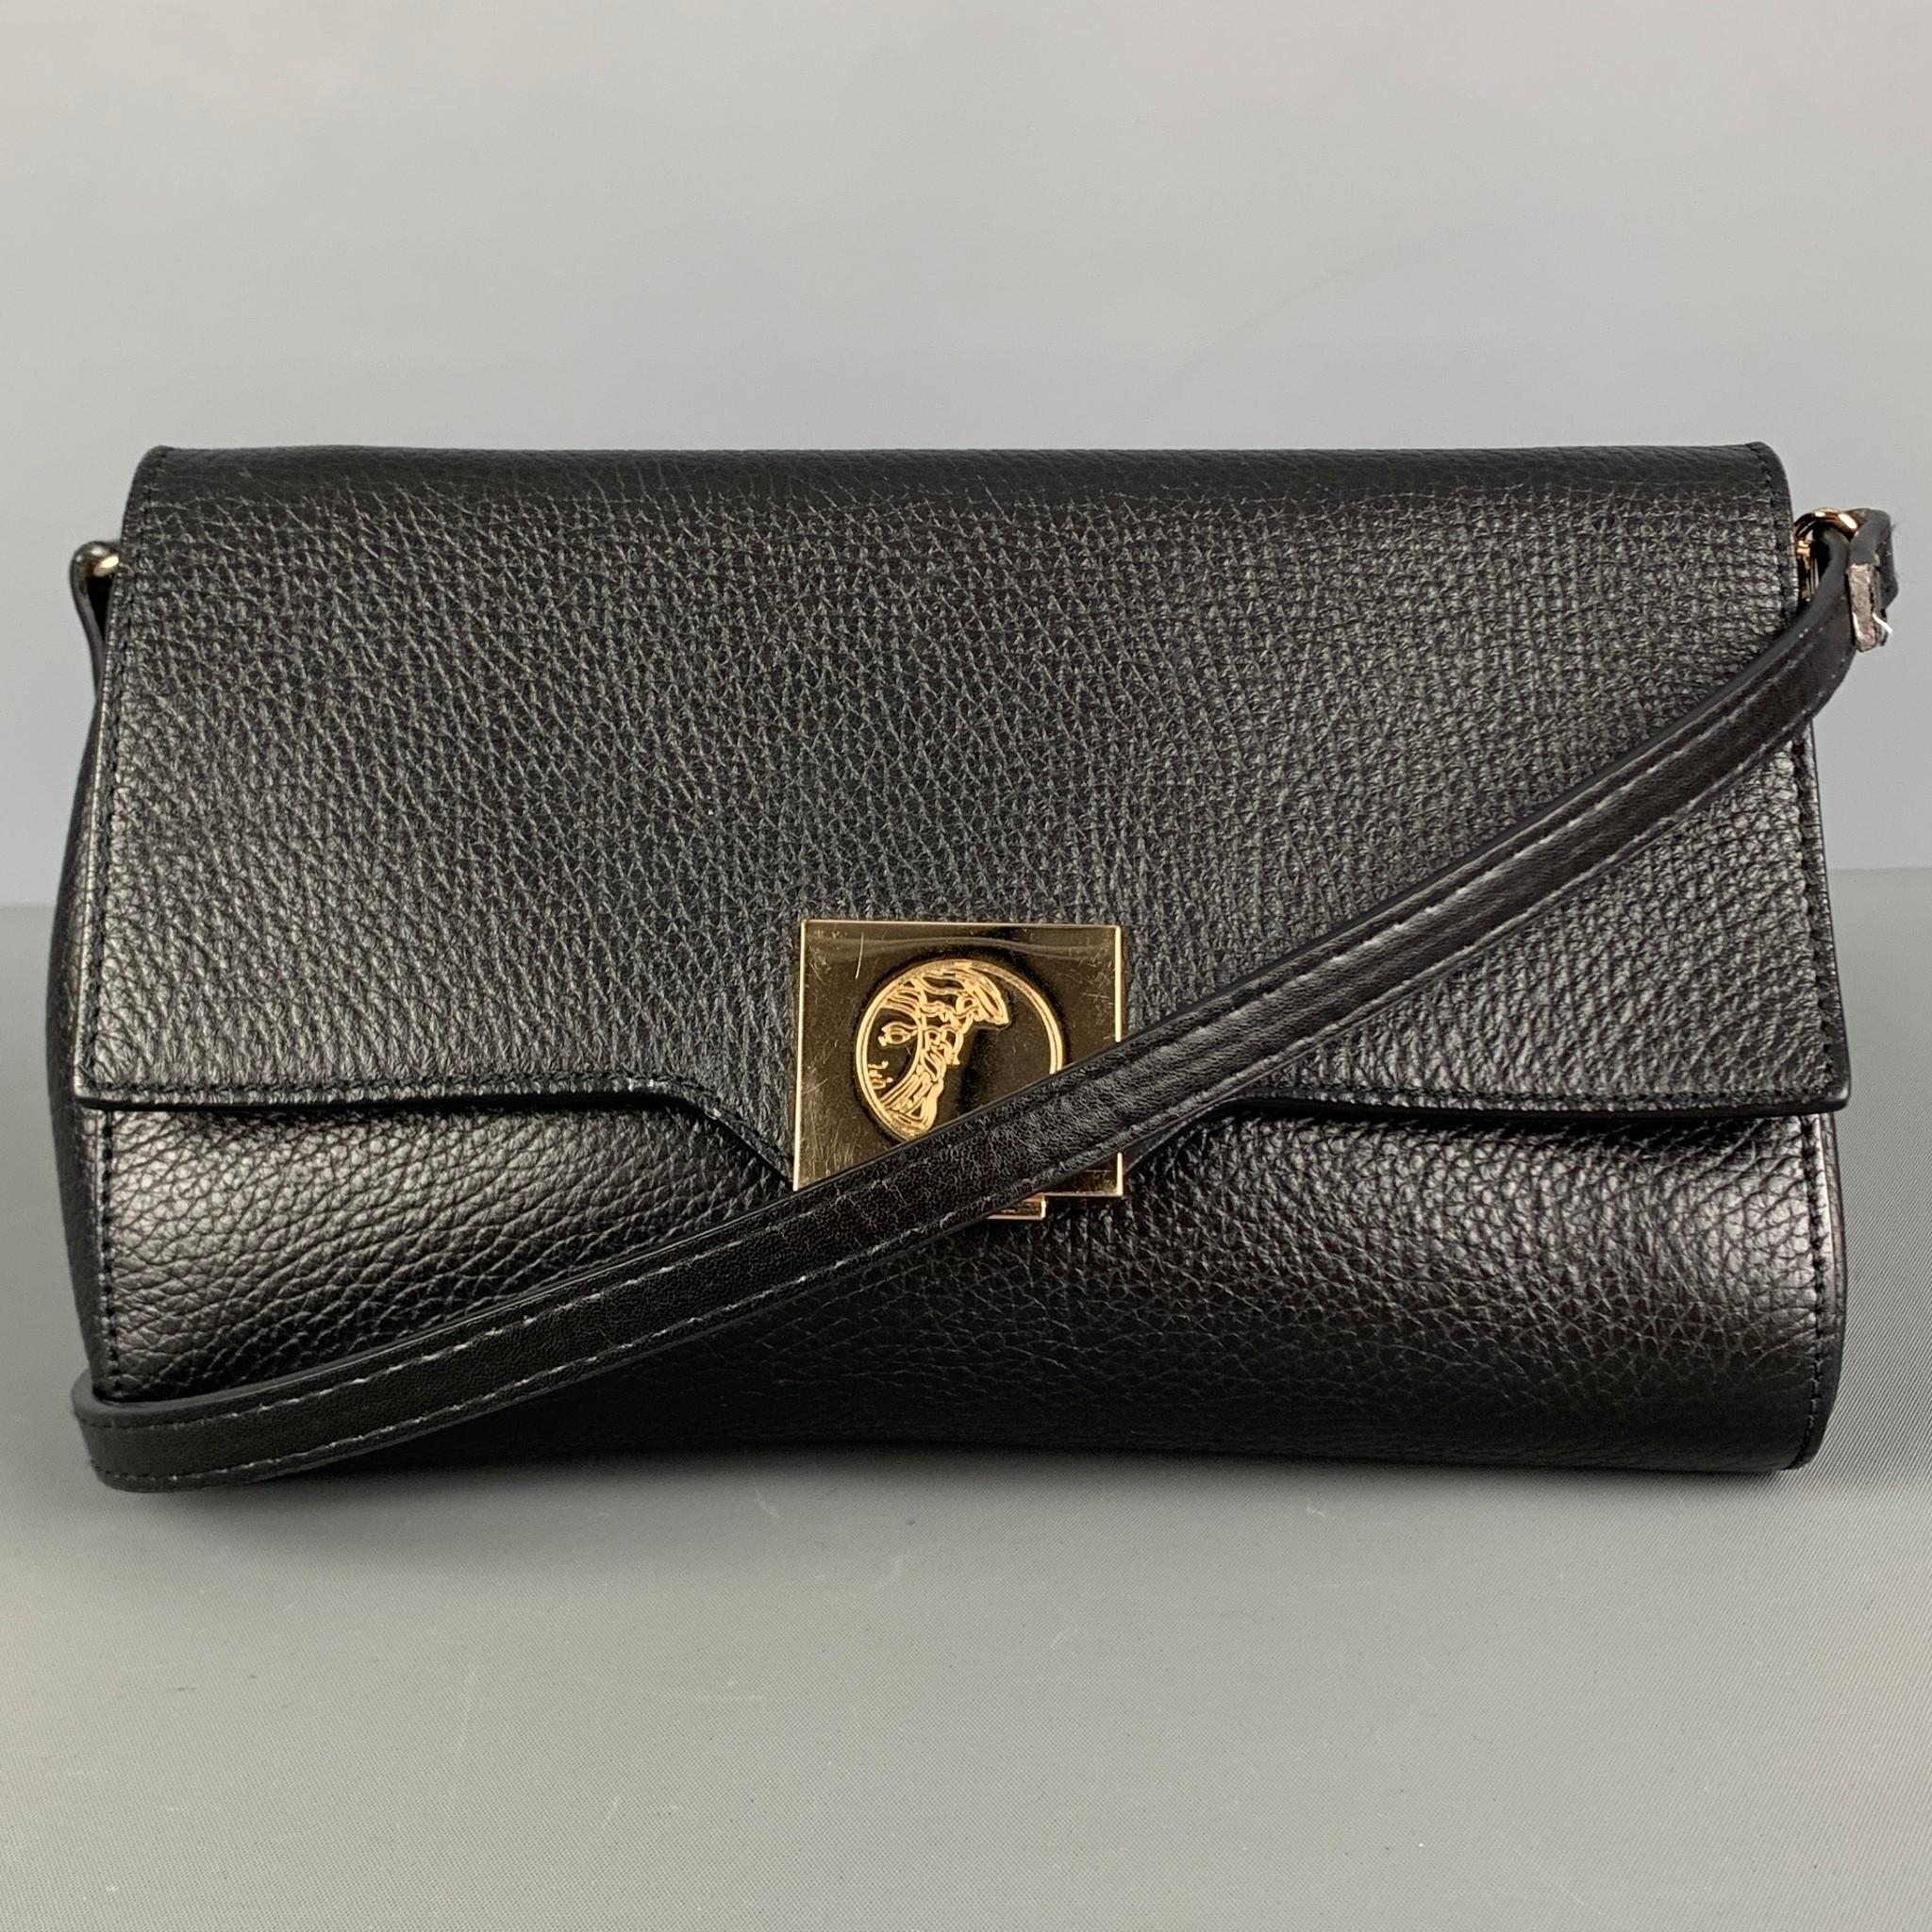 VERSACE COLLECTION handbag comes in a black pebble grain leather, gold tone medusa hardware, inner zipper pocket, replaced detachable shoulder strap, wrist strap, and a push lock closure. Comes with dust bag. Made in Italy.

Very Good Pre- Owned